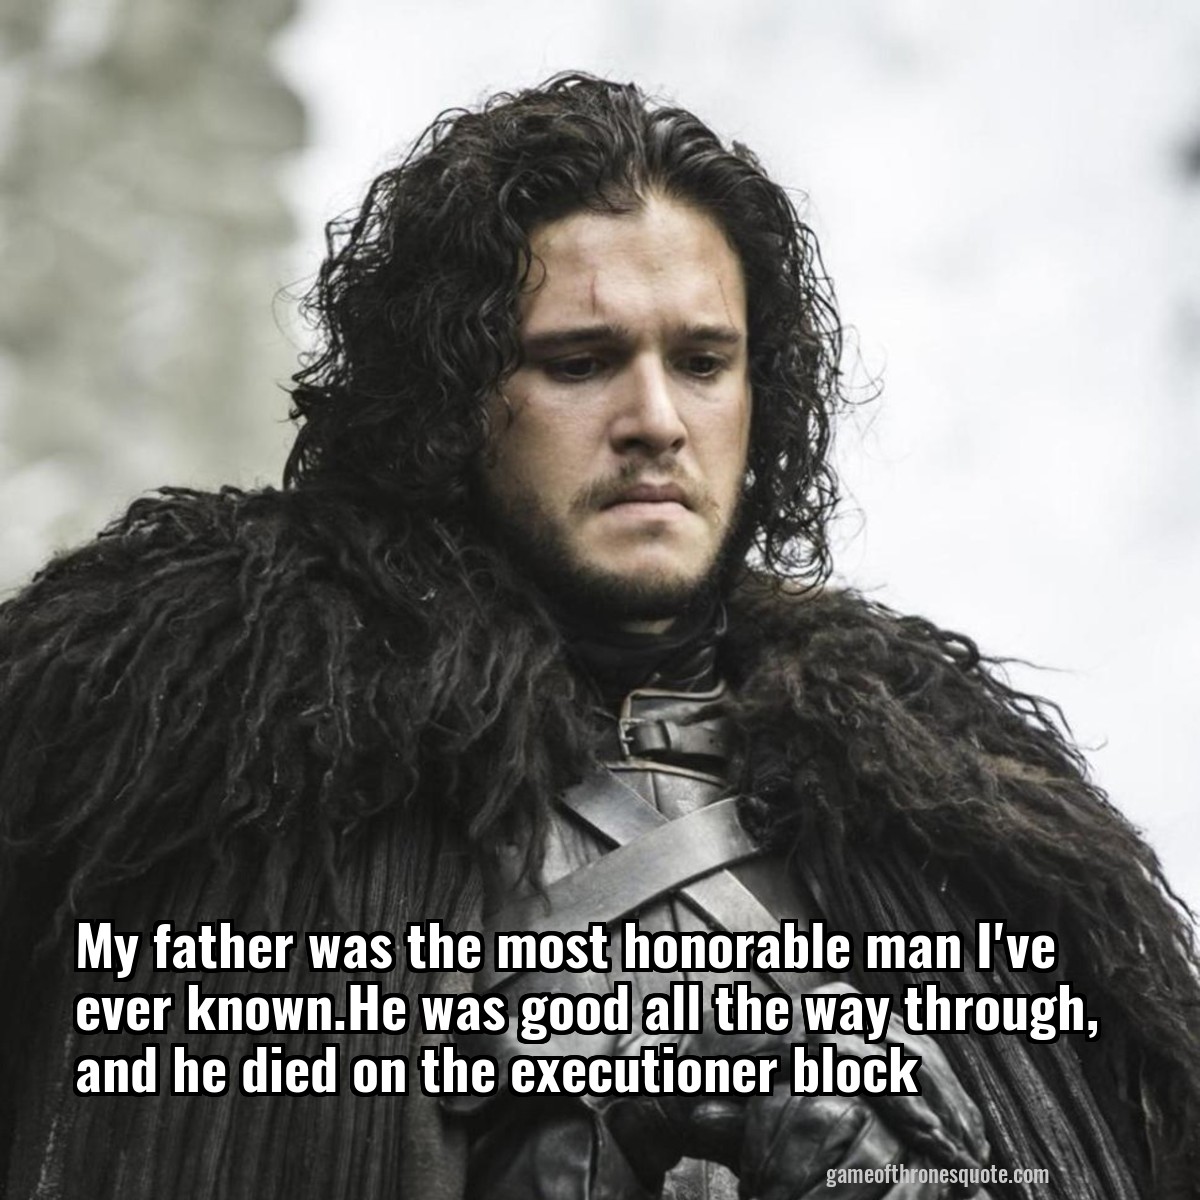 My father was the most honorable man I've ever known.He was good all the way through, and he died on the executioner block